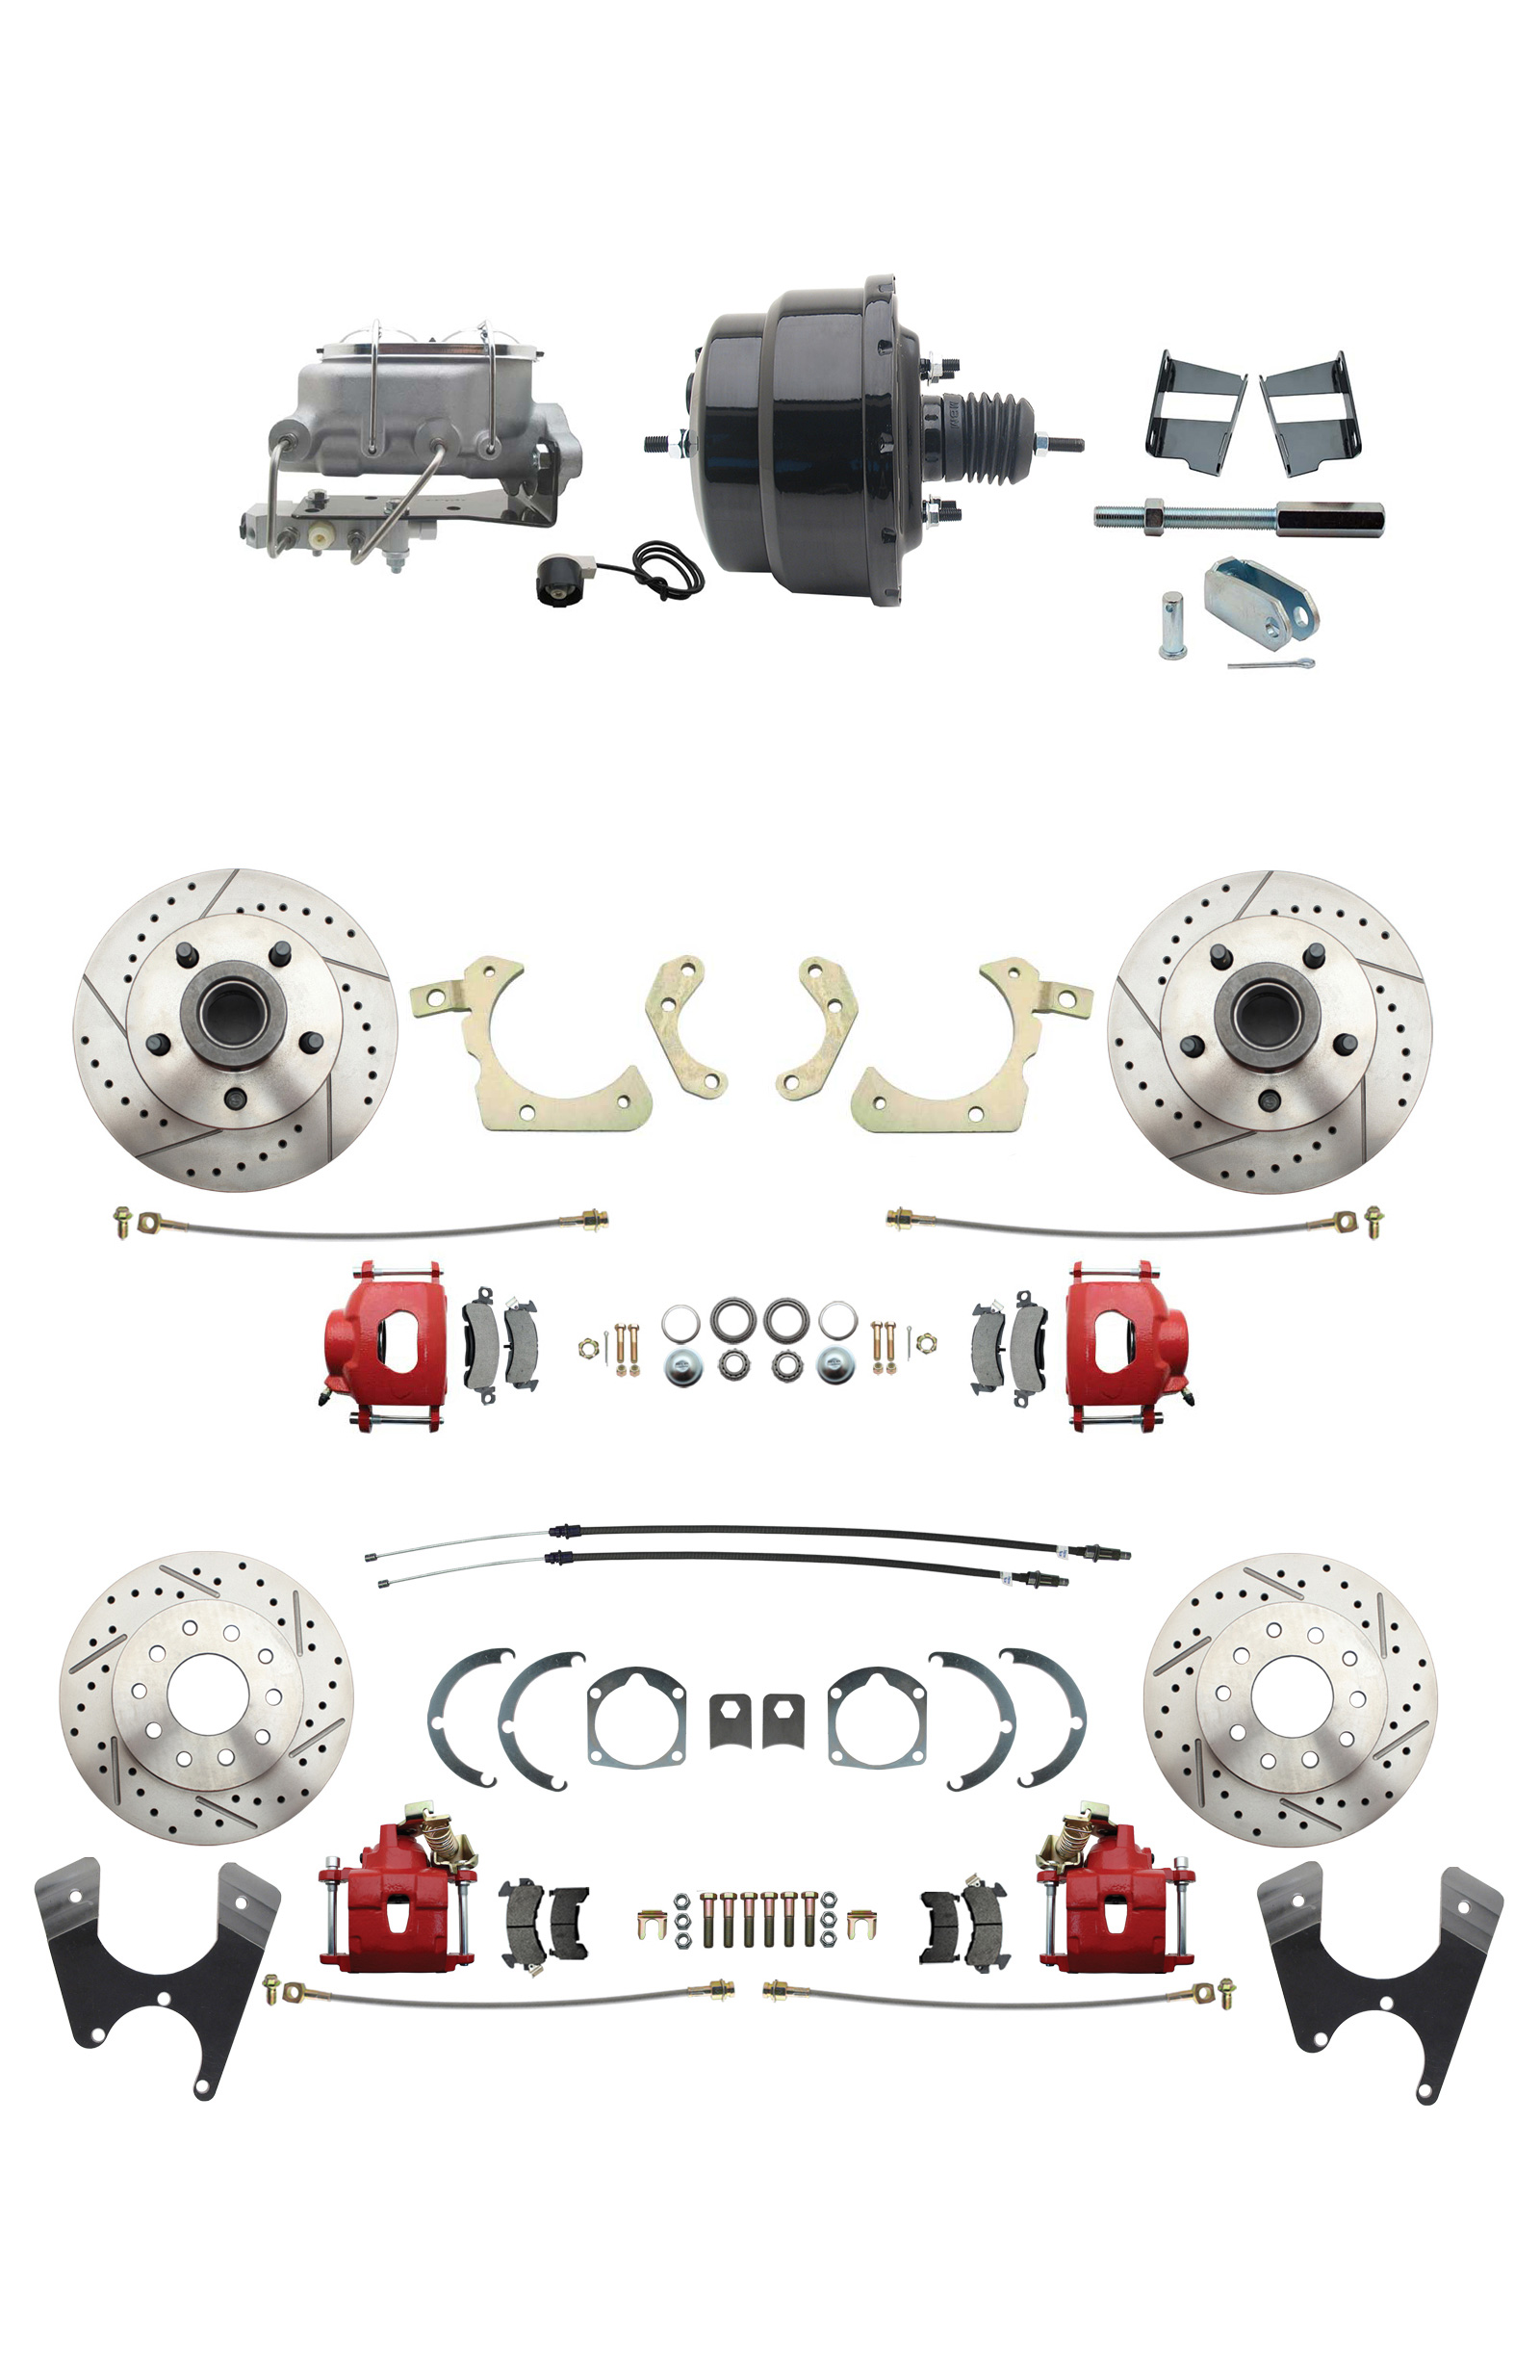 1959-1964 GM Full Size Front & Rear Power Disc Brake Kit Red Powder Coated Calipers Drilled/Slotted Rotors (Impala, Bel Air, Biscayne) & 8 Dual Powder Coated Black Booster Conversion Kit W/ Aluminum Master Cylinder Bott